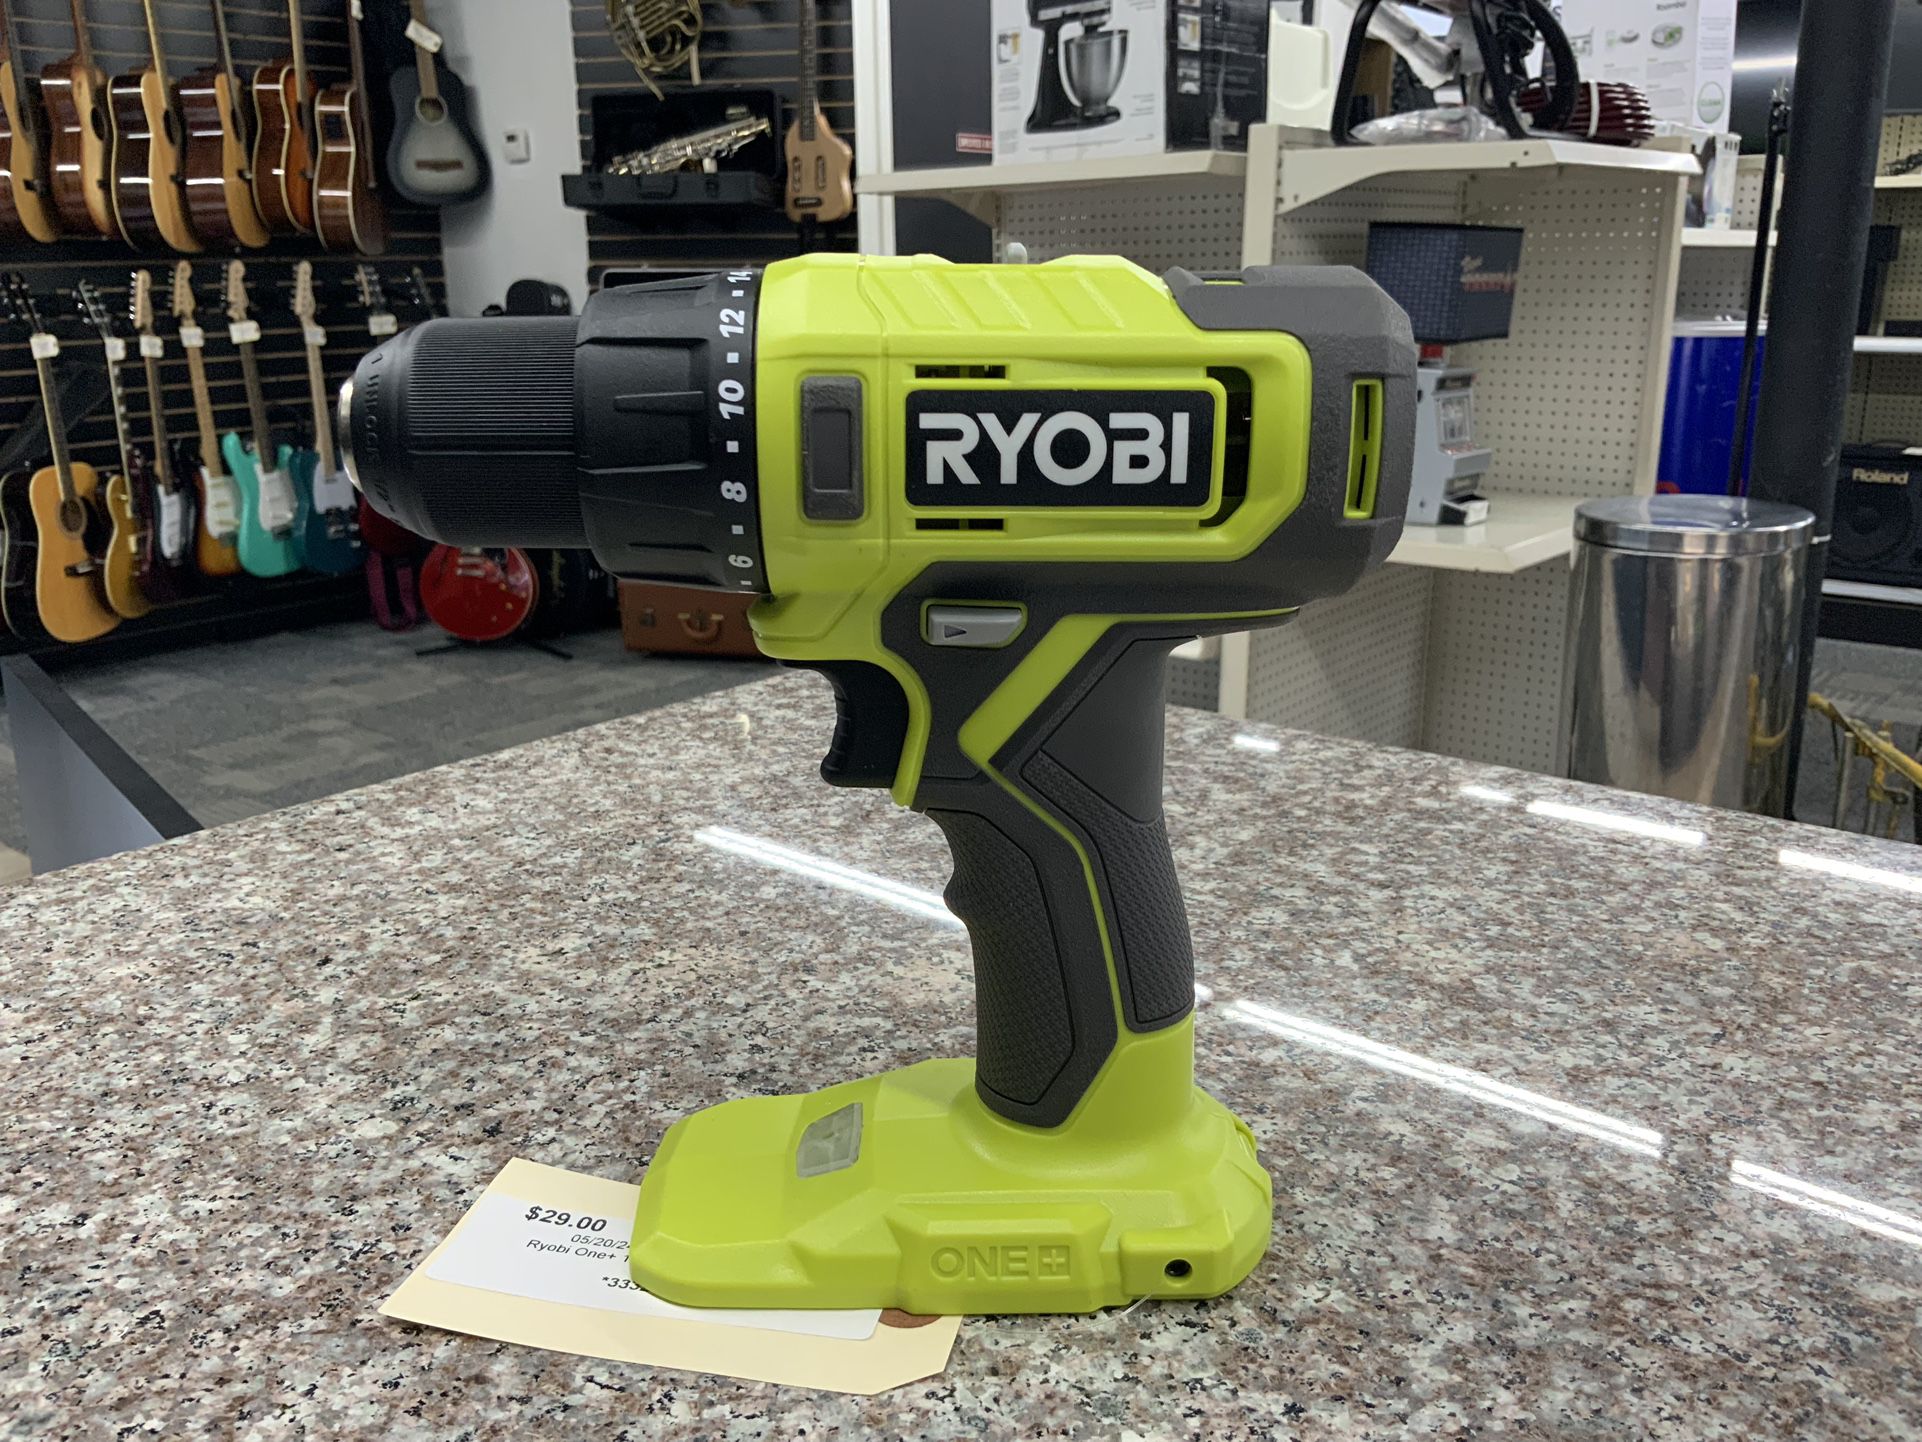 RYOBI ONE+ 18V Cordless 1/2 in. Drill/Driver (Tool Only)